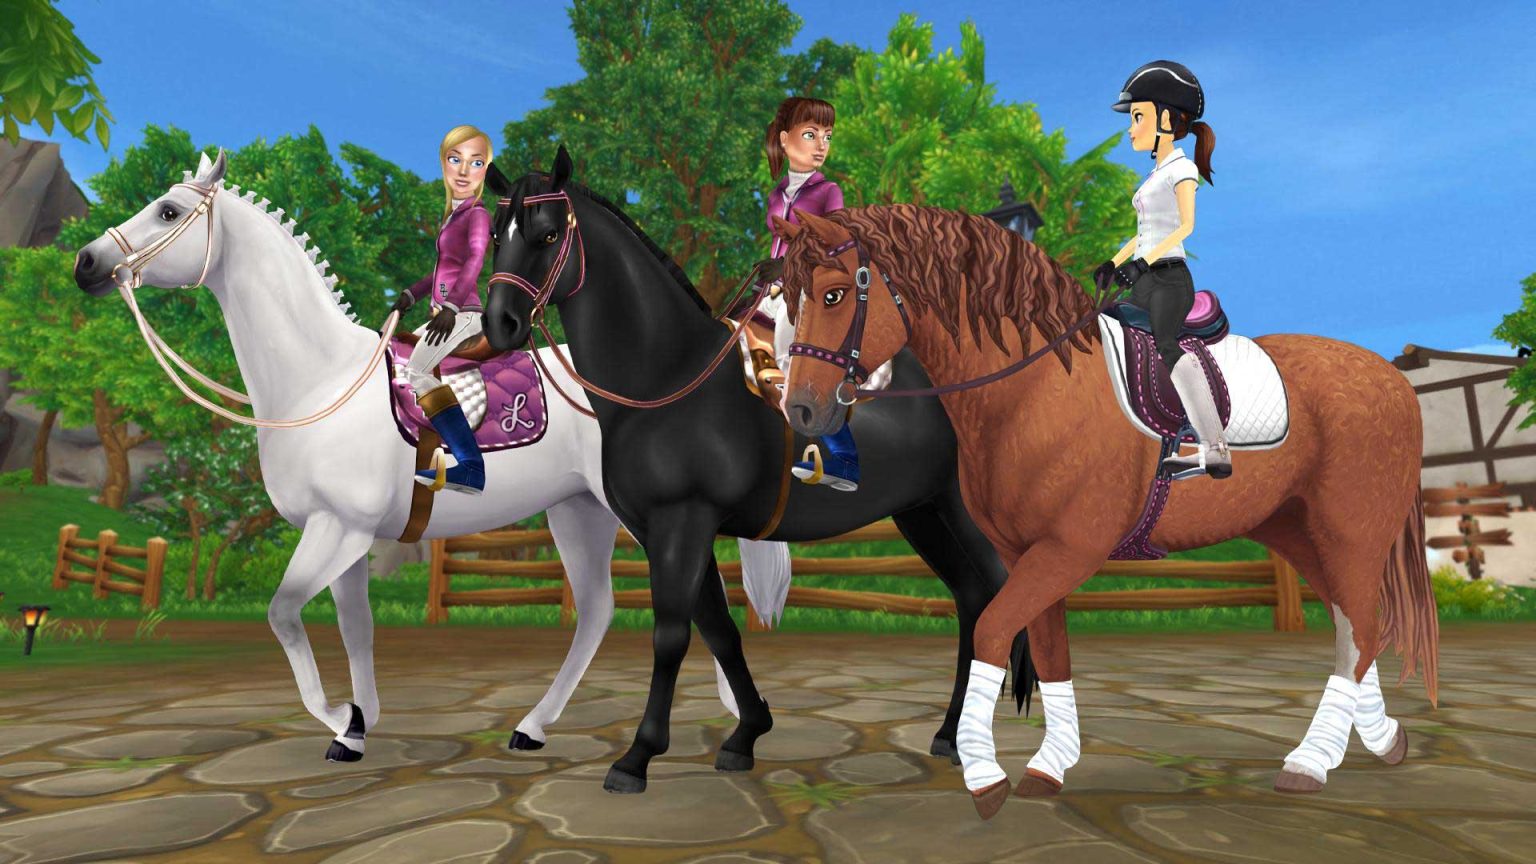 star stable codes 2021 may